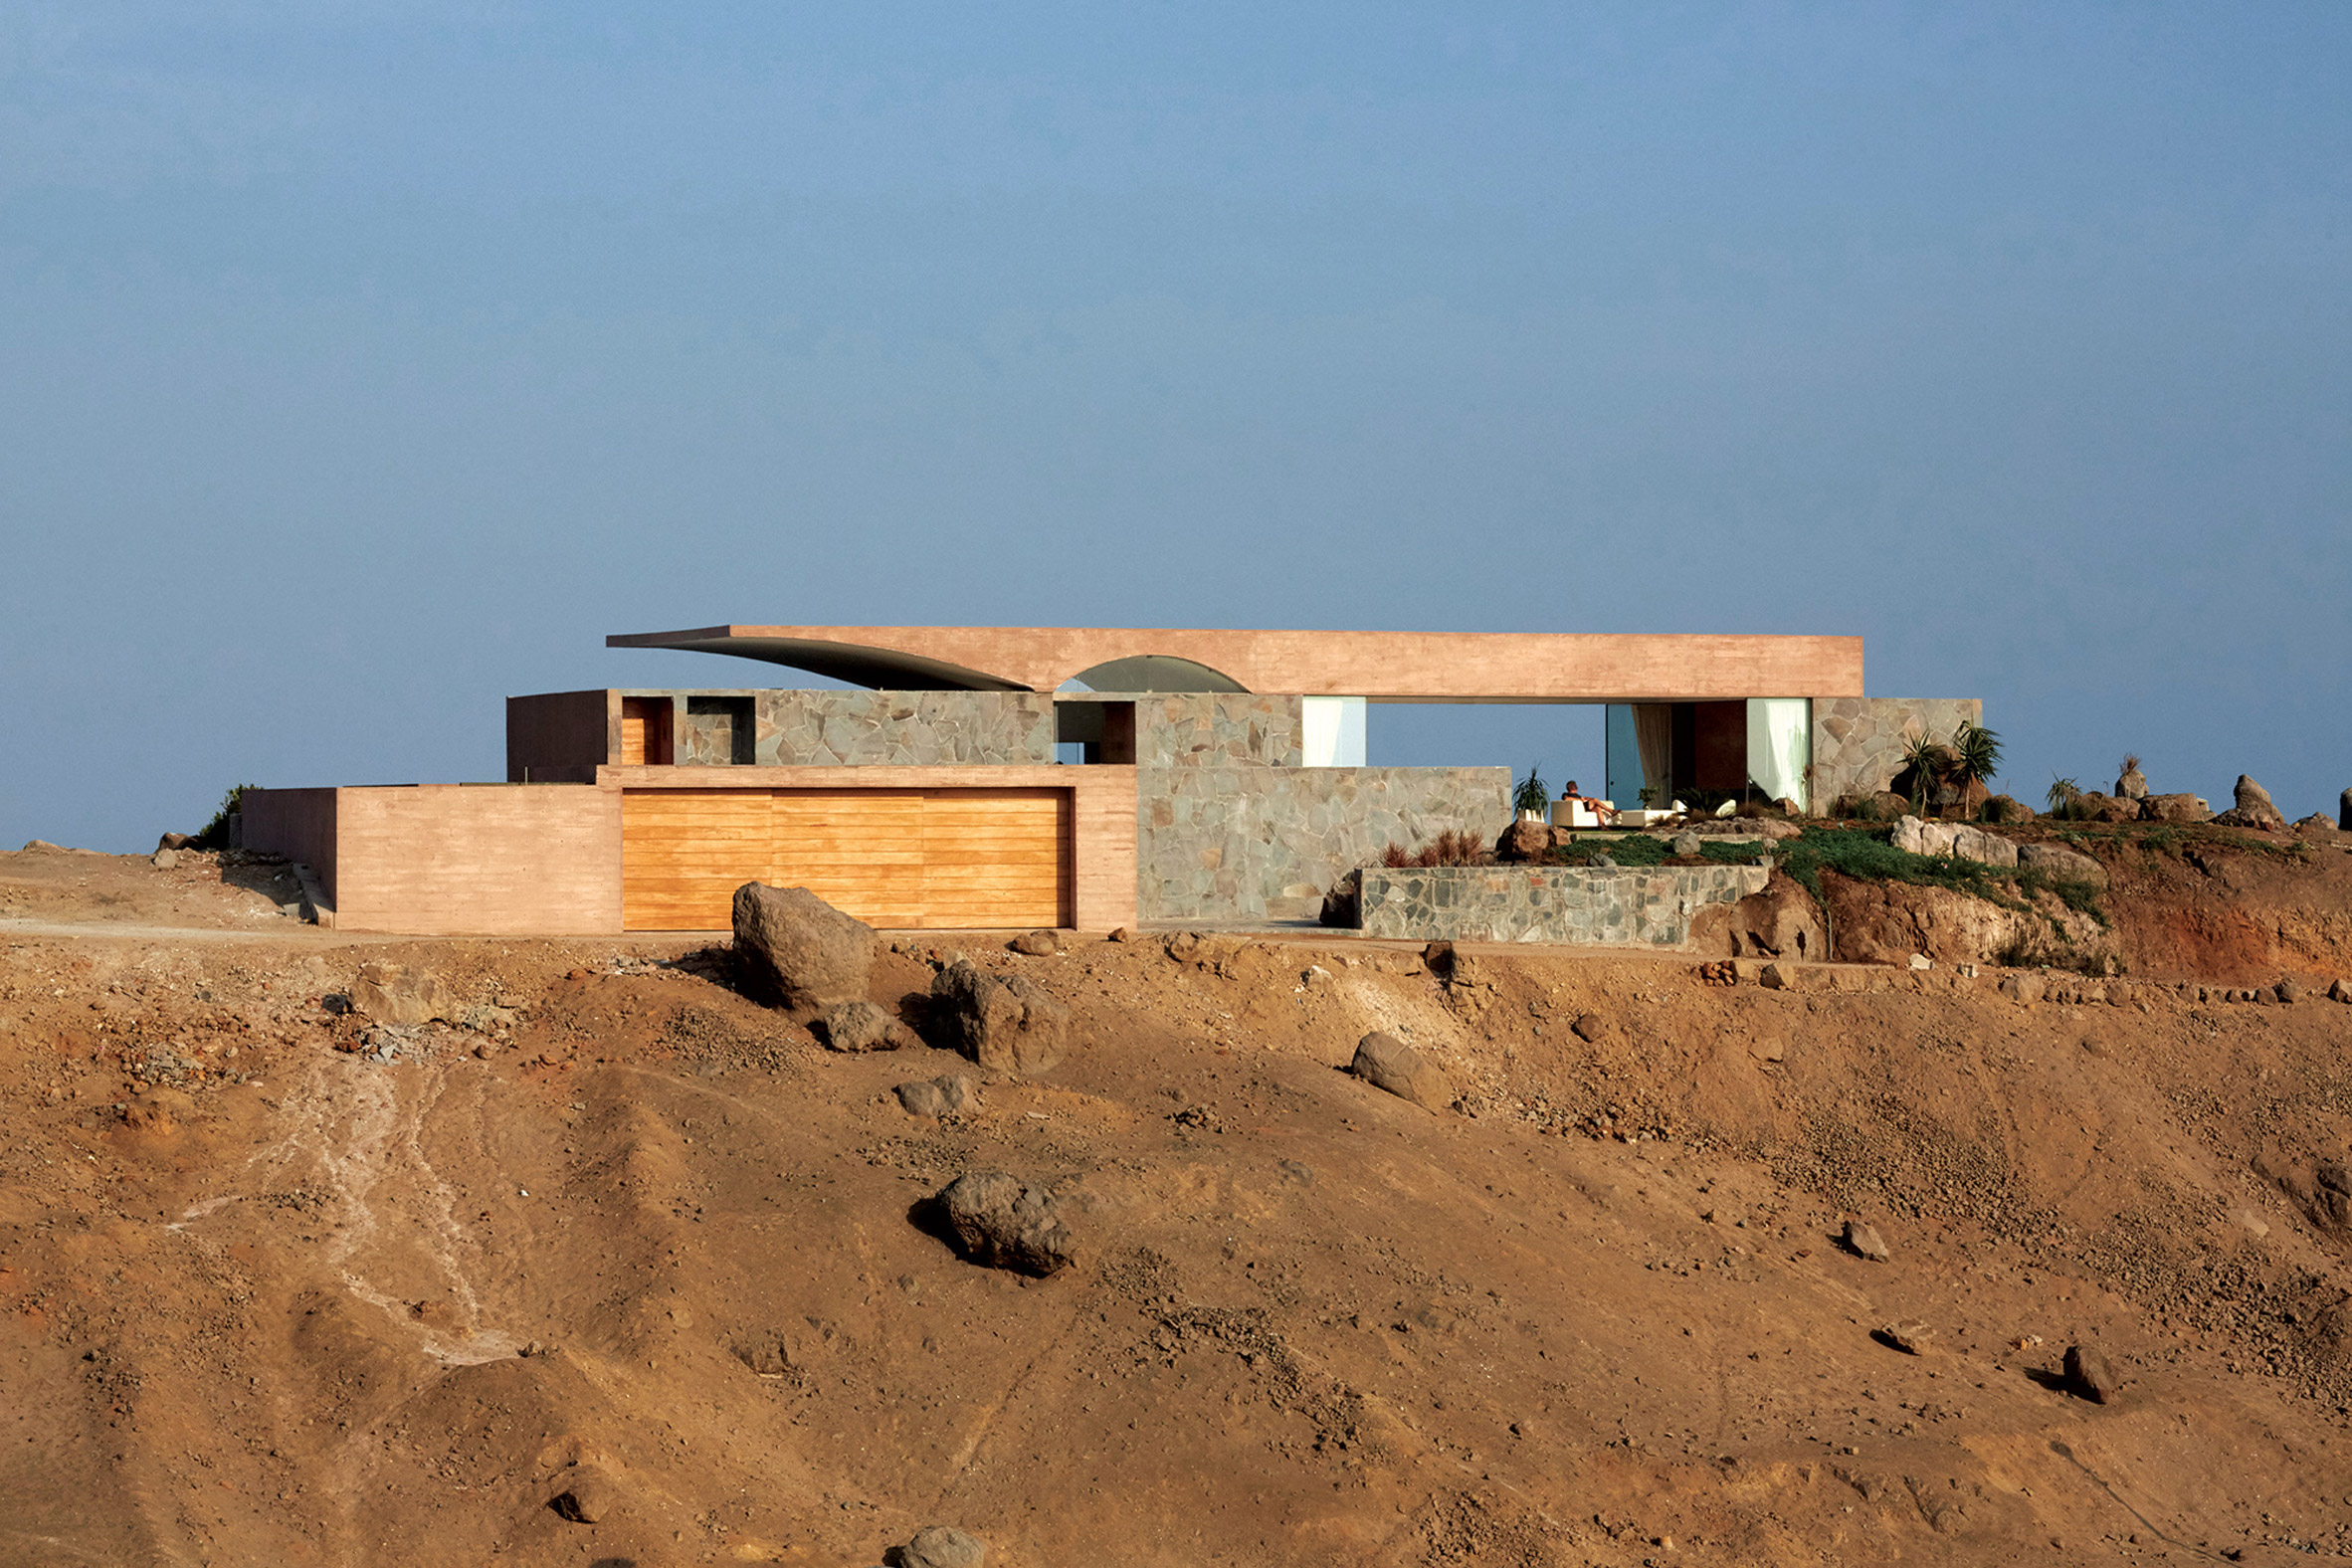 Barclay & Crousse design clifftop villa to blend in with the Peruvian desert